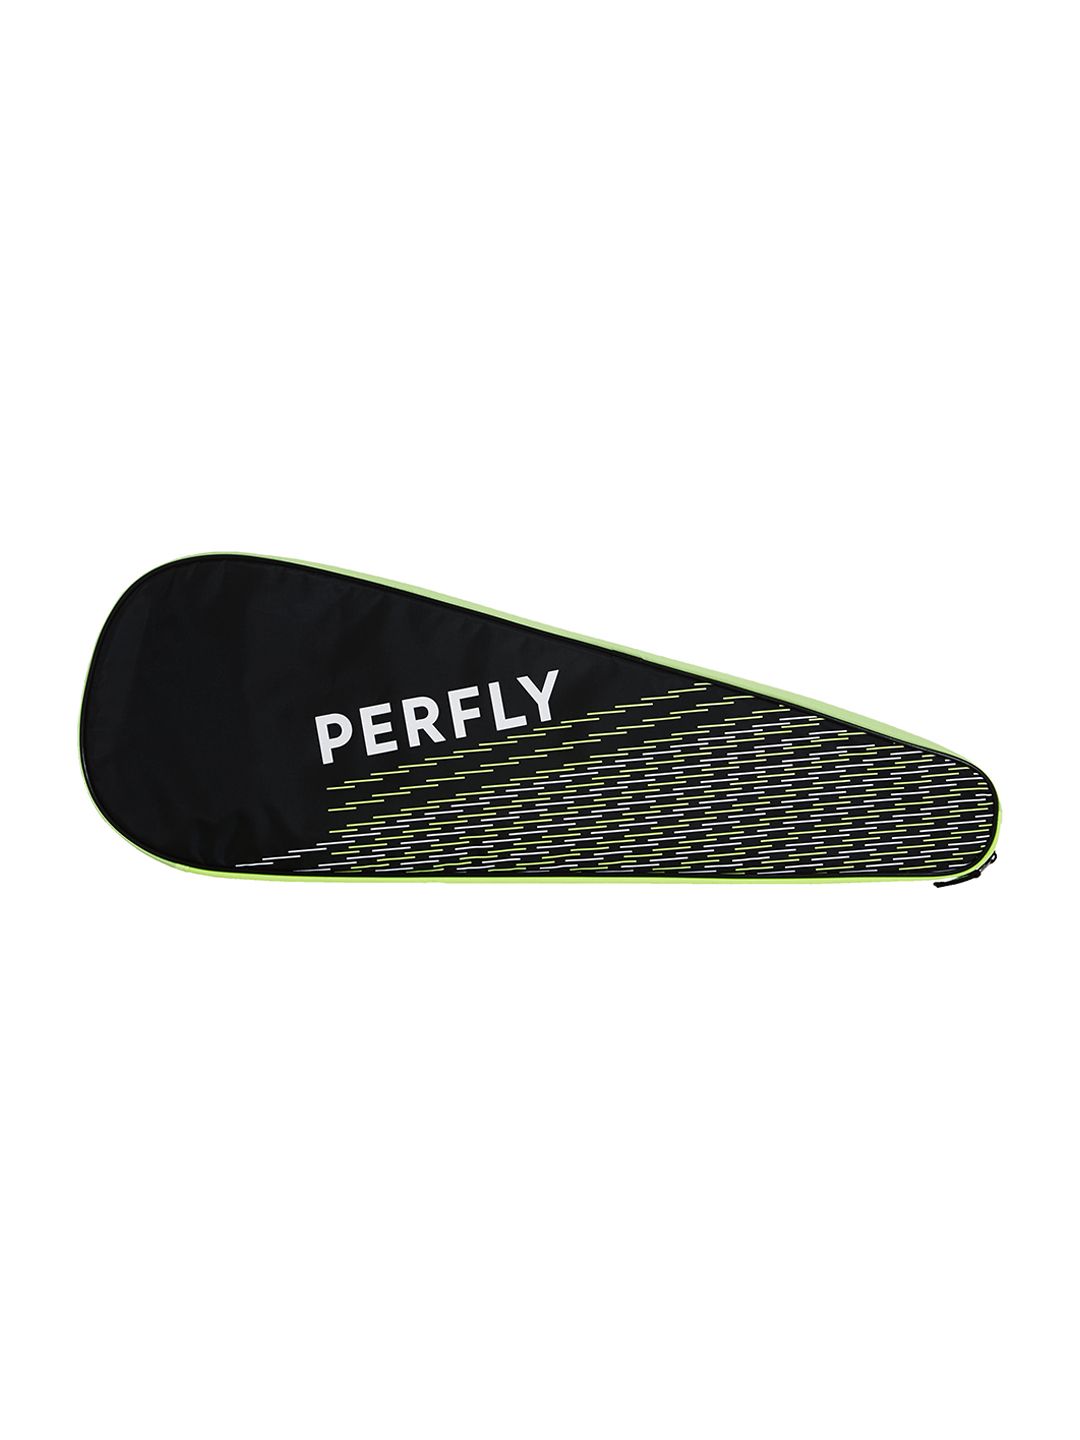 PERFLY By Decathlon Unisex Green 190 Eco Badminton Cover Price in India